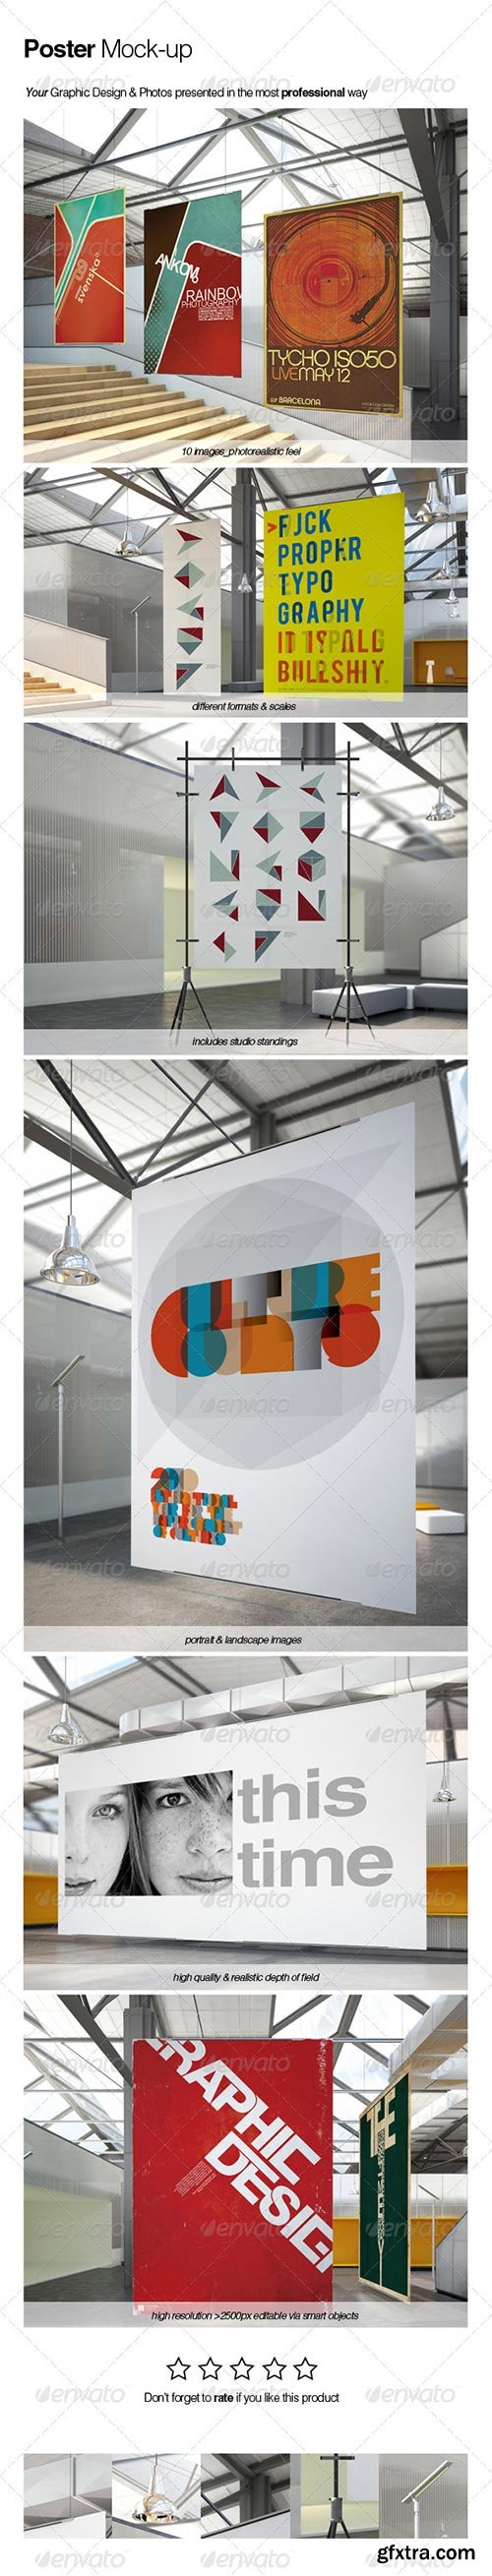 Graphicriver - Poster Mock-up 2275267